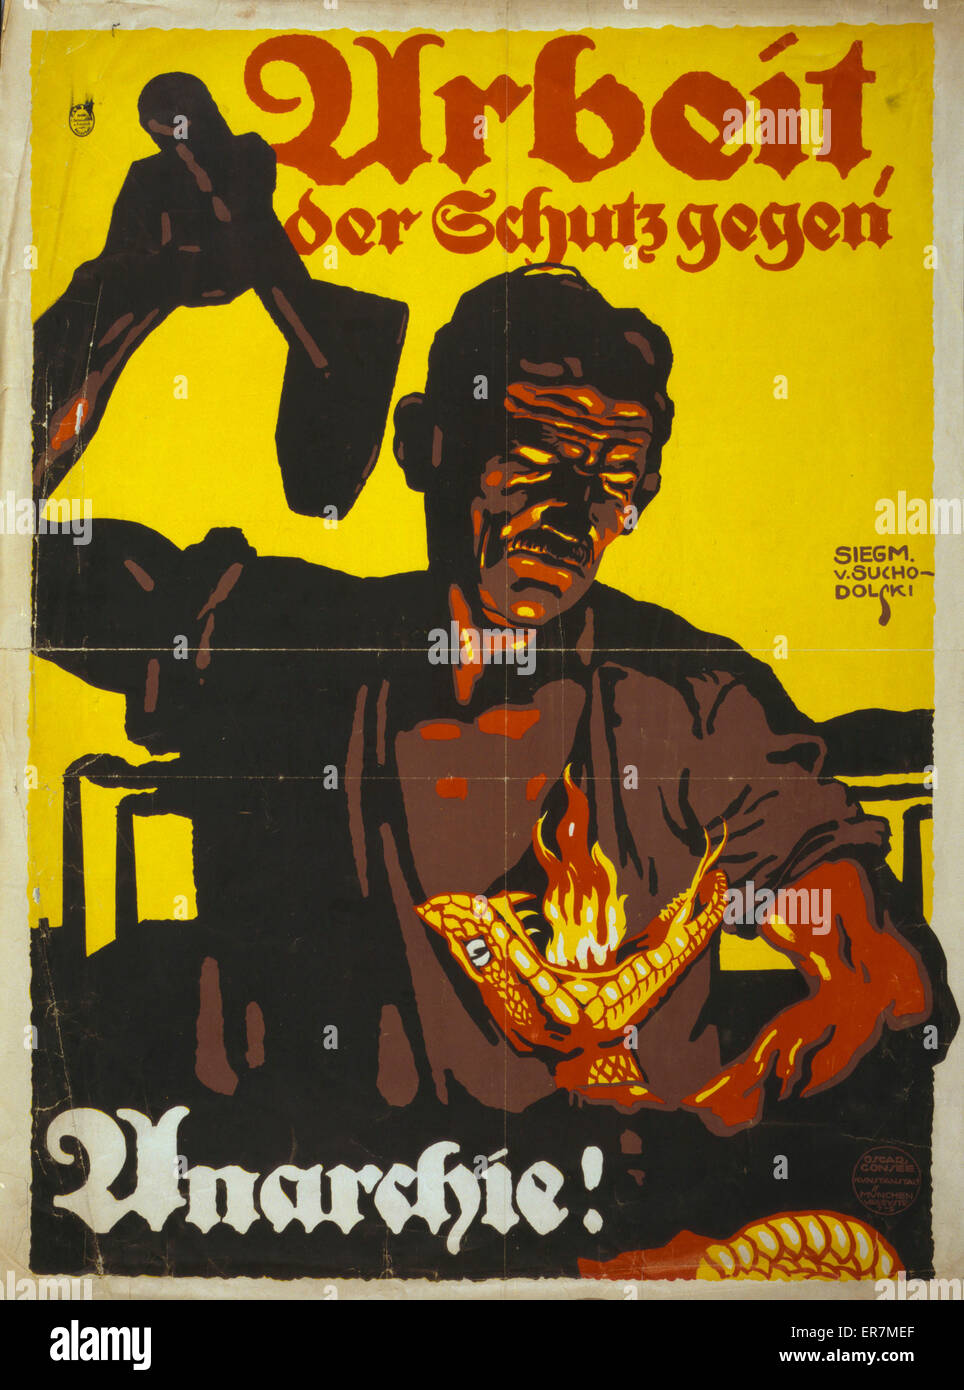 Arbeit, der Schutz gegen Anarchie!. Poster shows a blacksmith(?) holding a raised hammer, about to strike a snake with flames erupting from its mouth; in background smokestacks. Text: Work, the protection against anarchy. Date 1919. Stock Photo